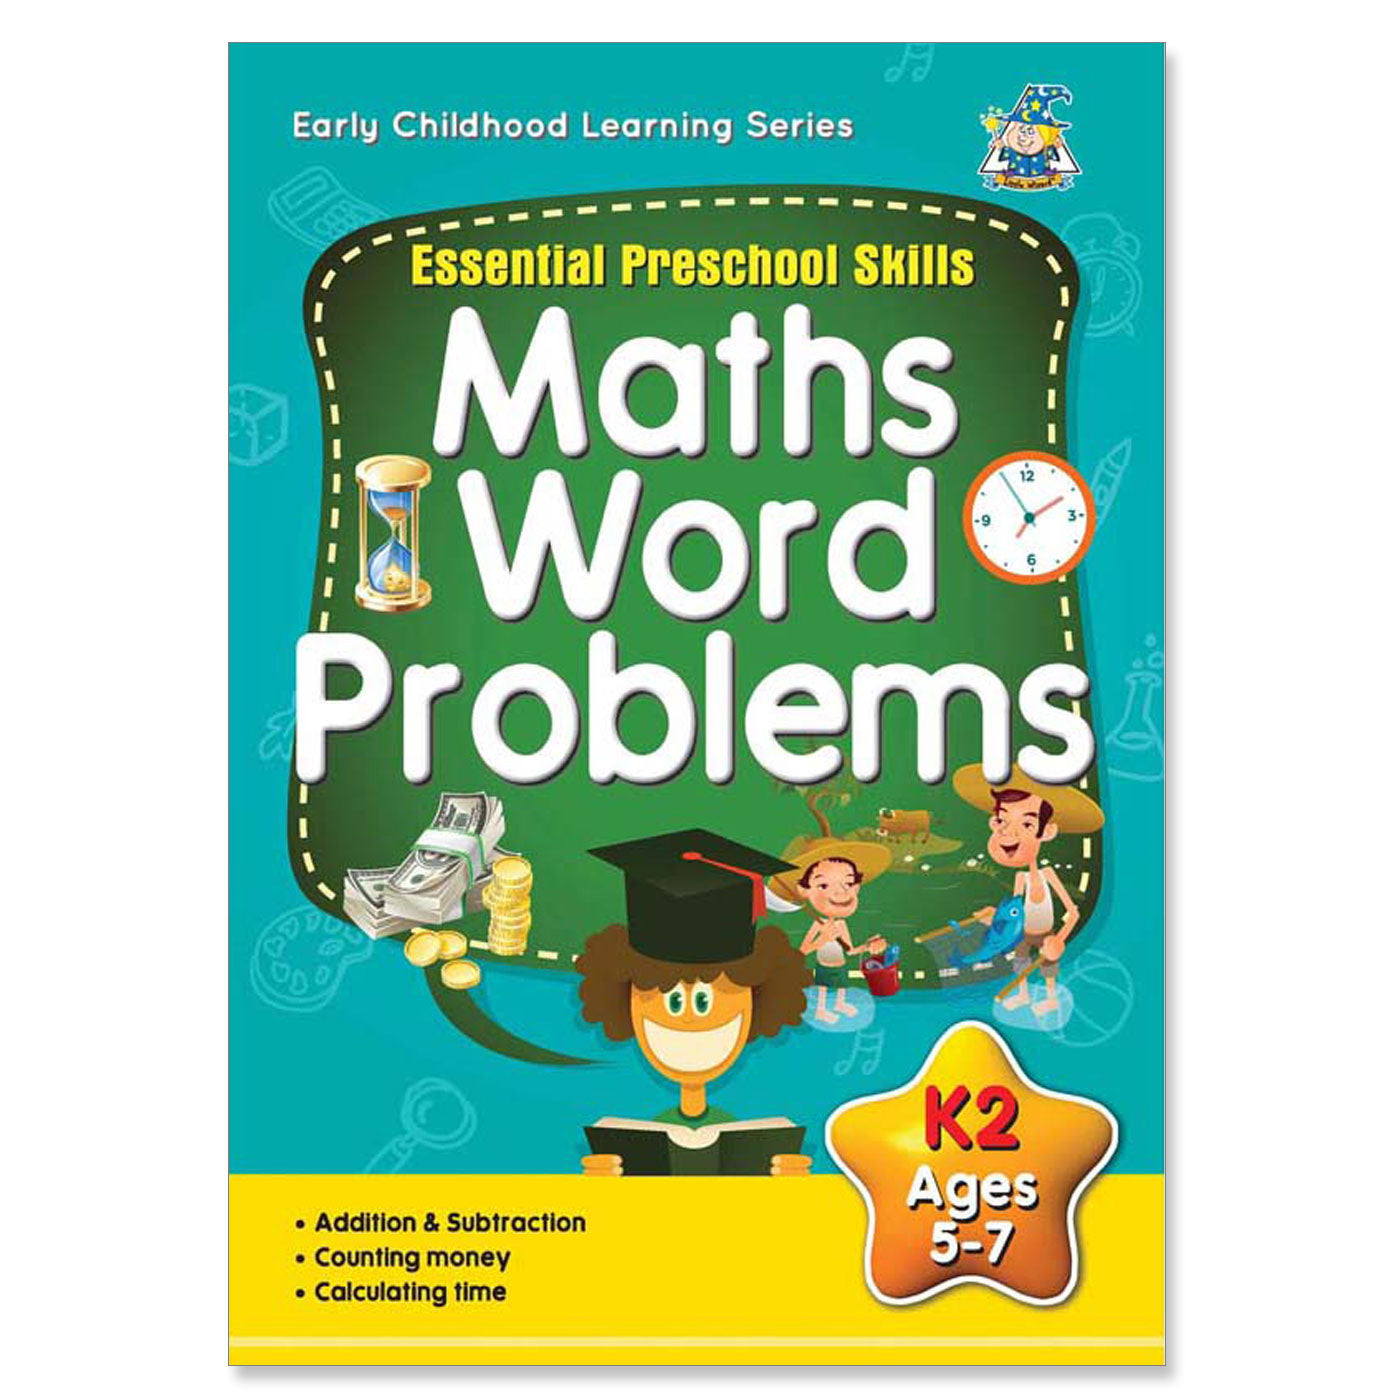 Greenhill Math Word Problems Activity Book 5-7 Years